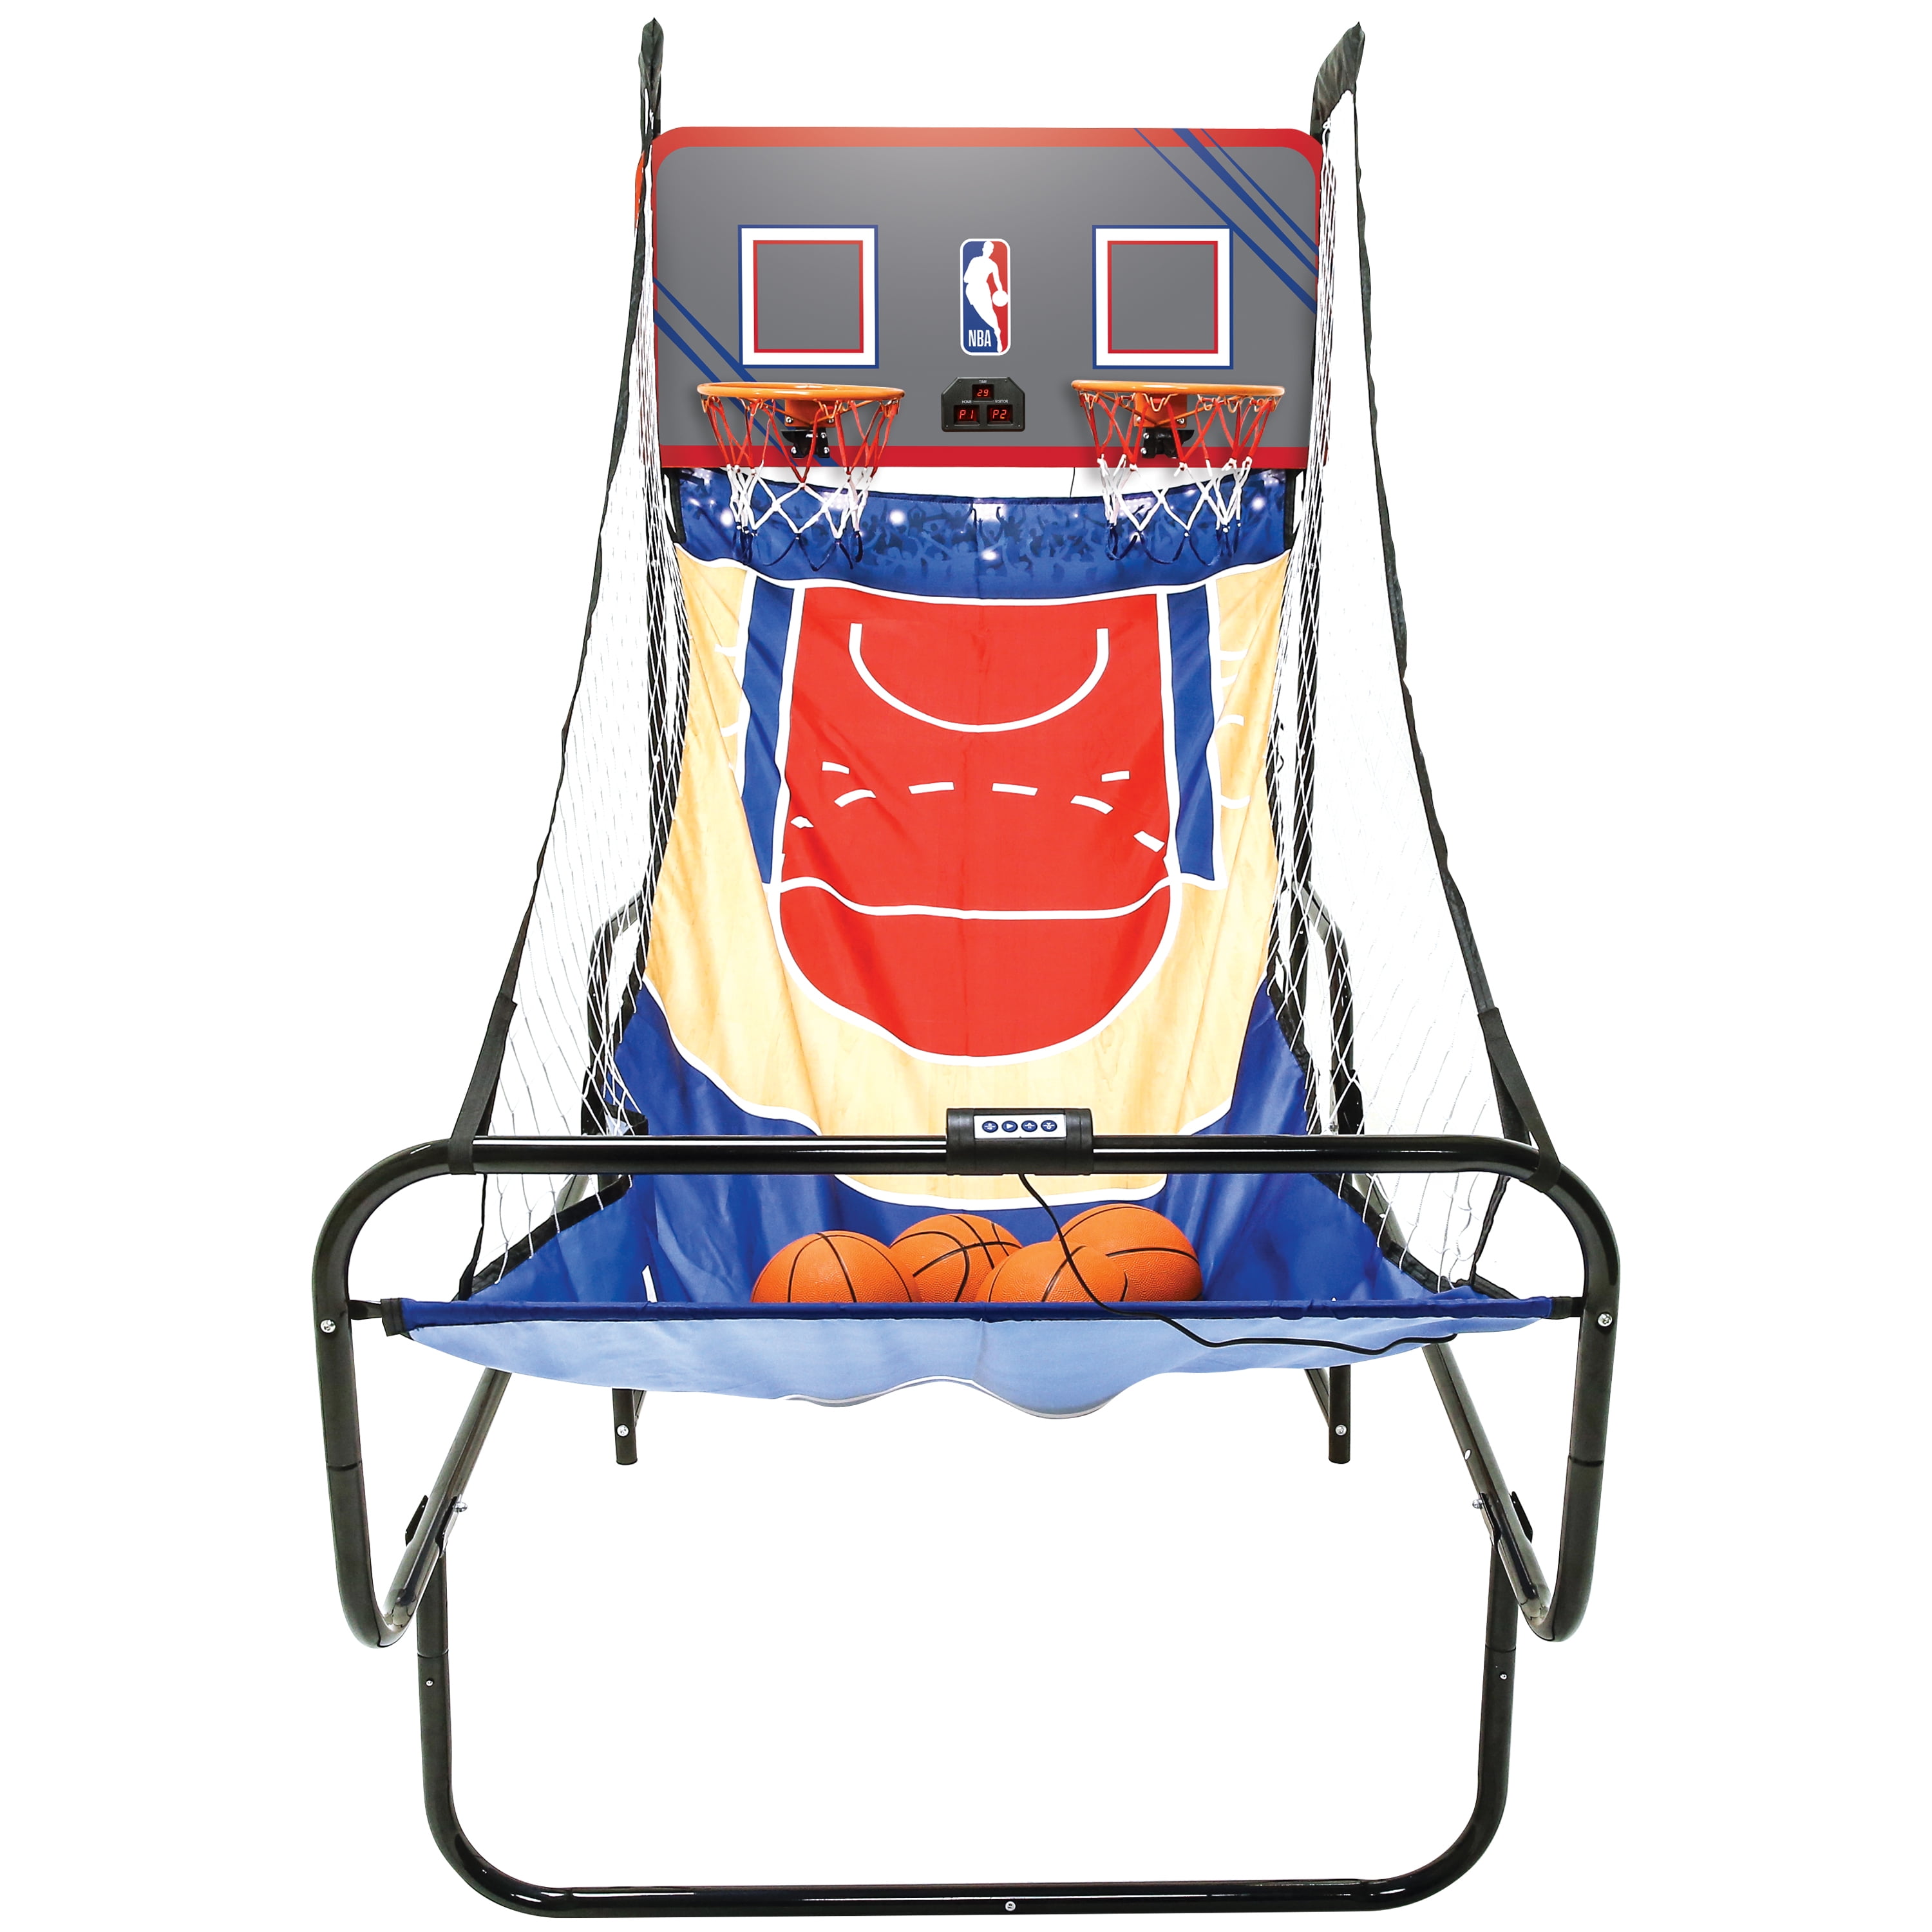 LXLA Indoor Basketball Arcade Game for Adults, Dual Shot Basketball Hoop  with Electronic Scoreboard …See more LXLA Indoor Basketball Arcade Game for